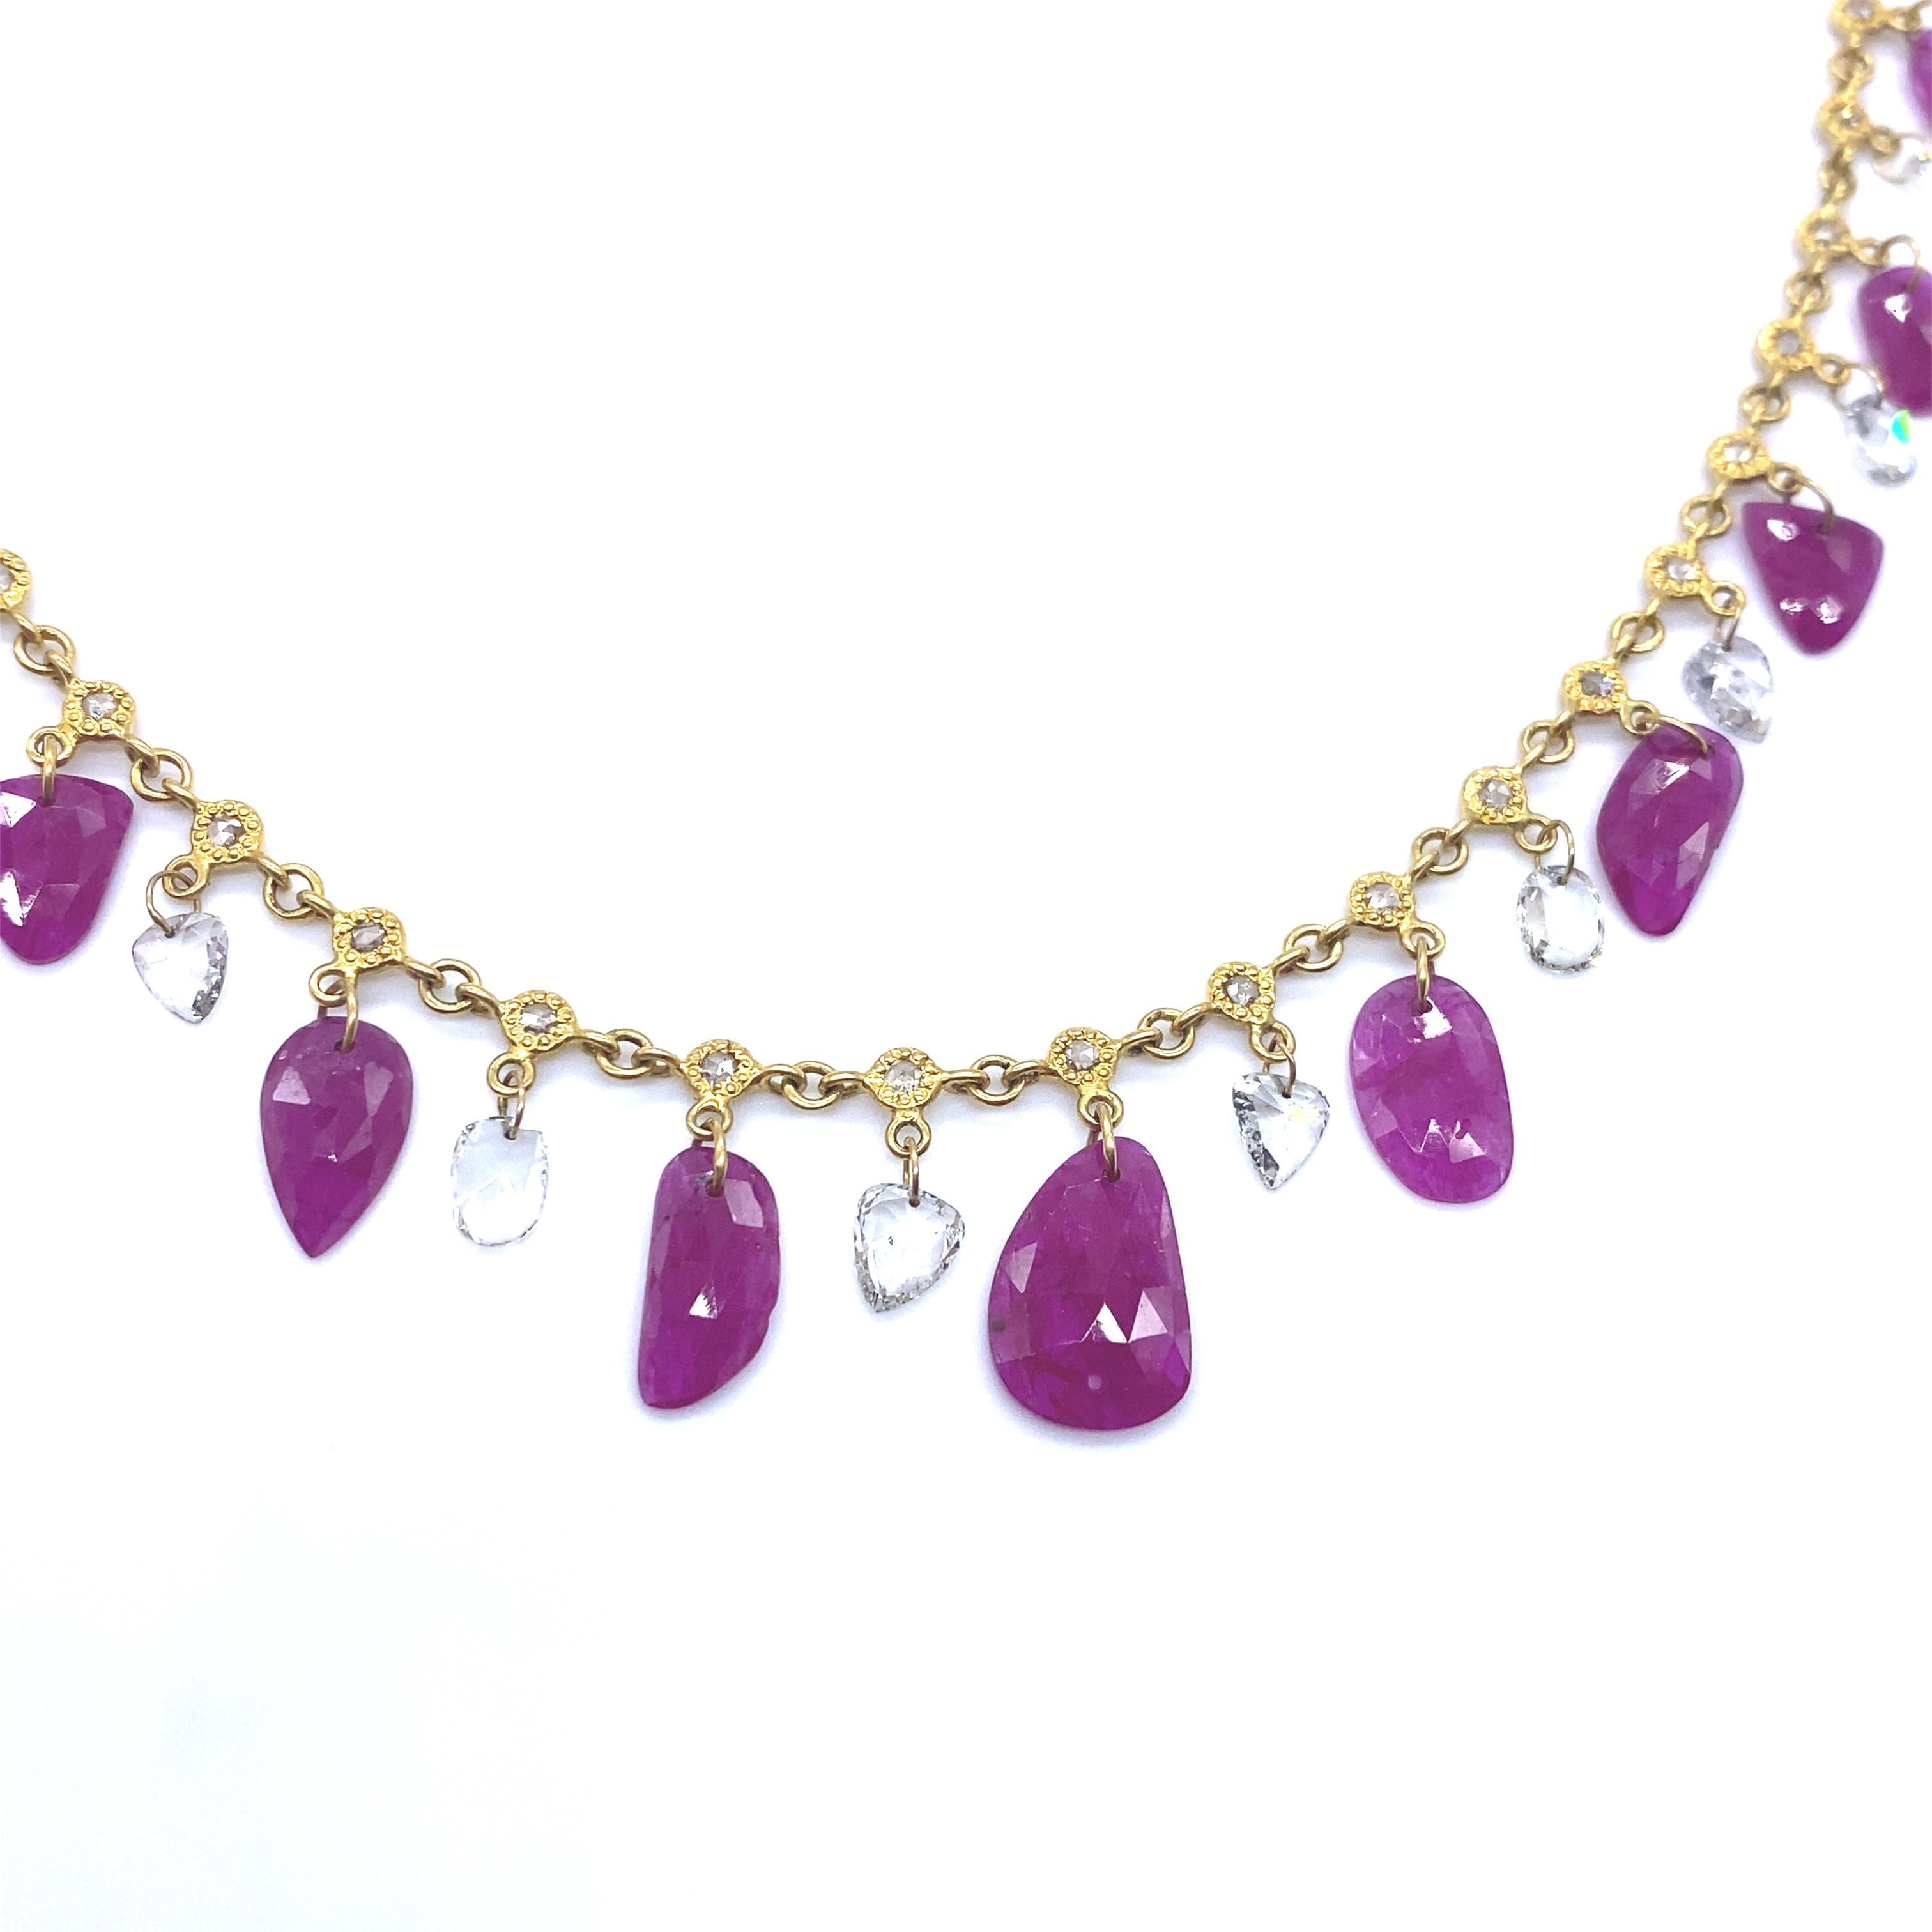 Affinity Necklace Set in 20 Karat Yellow Gold with 9.30 Carat Rubies and 3.35 Carat White Diamonds. This Beautiful Dangly Necklace Is Set with Drilled Rubies and Drilled Diamonds.